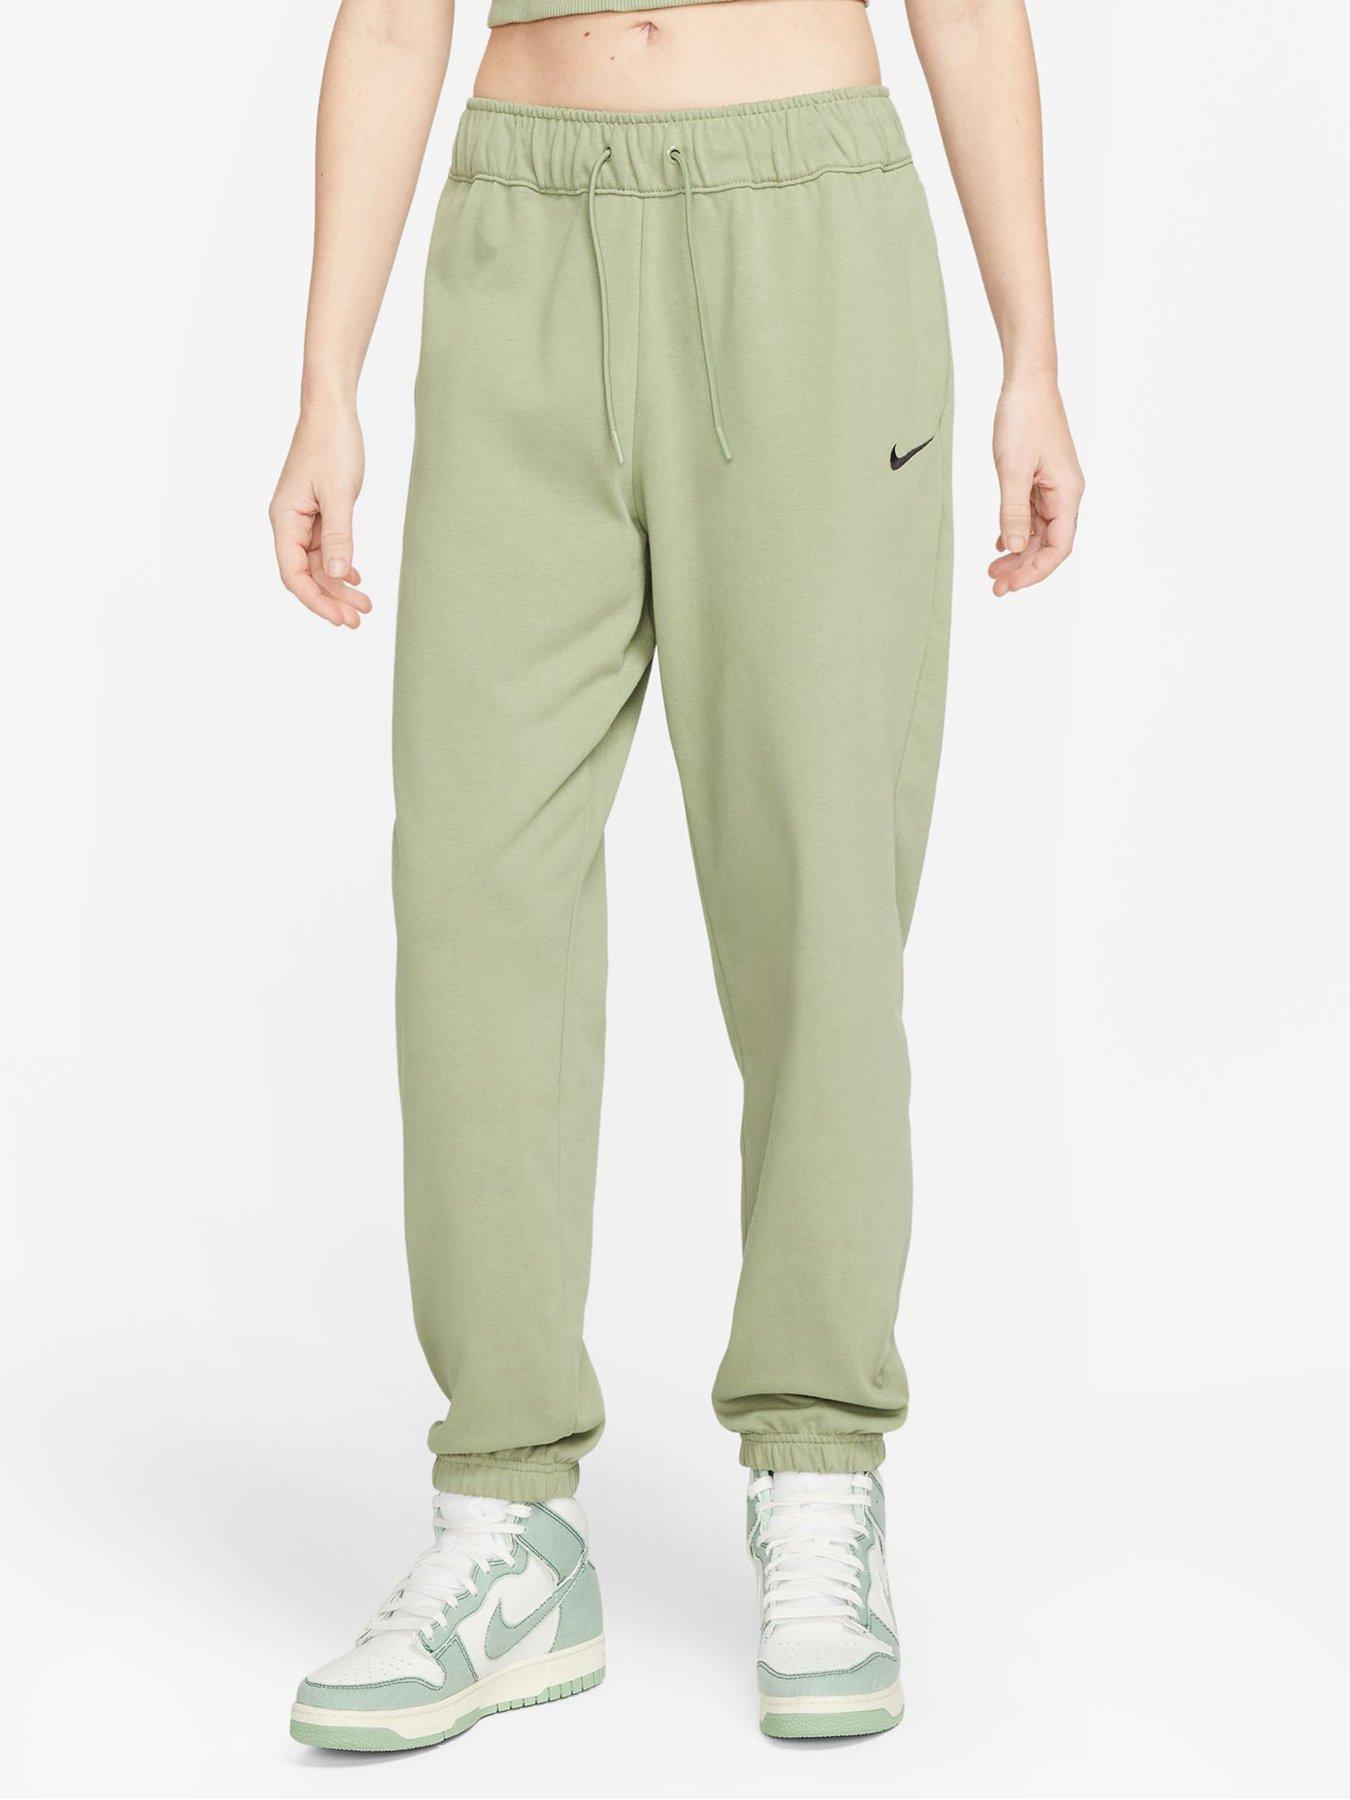 Dri-FIT Bliss Mid-Rise 7/8 Joggers by Nike Online